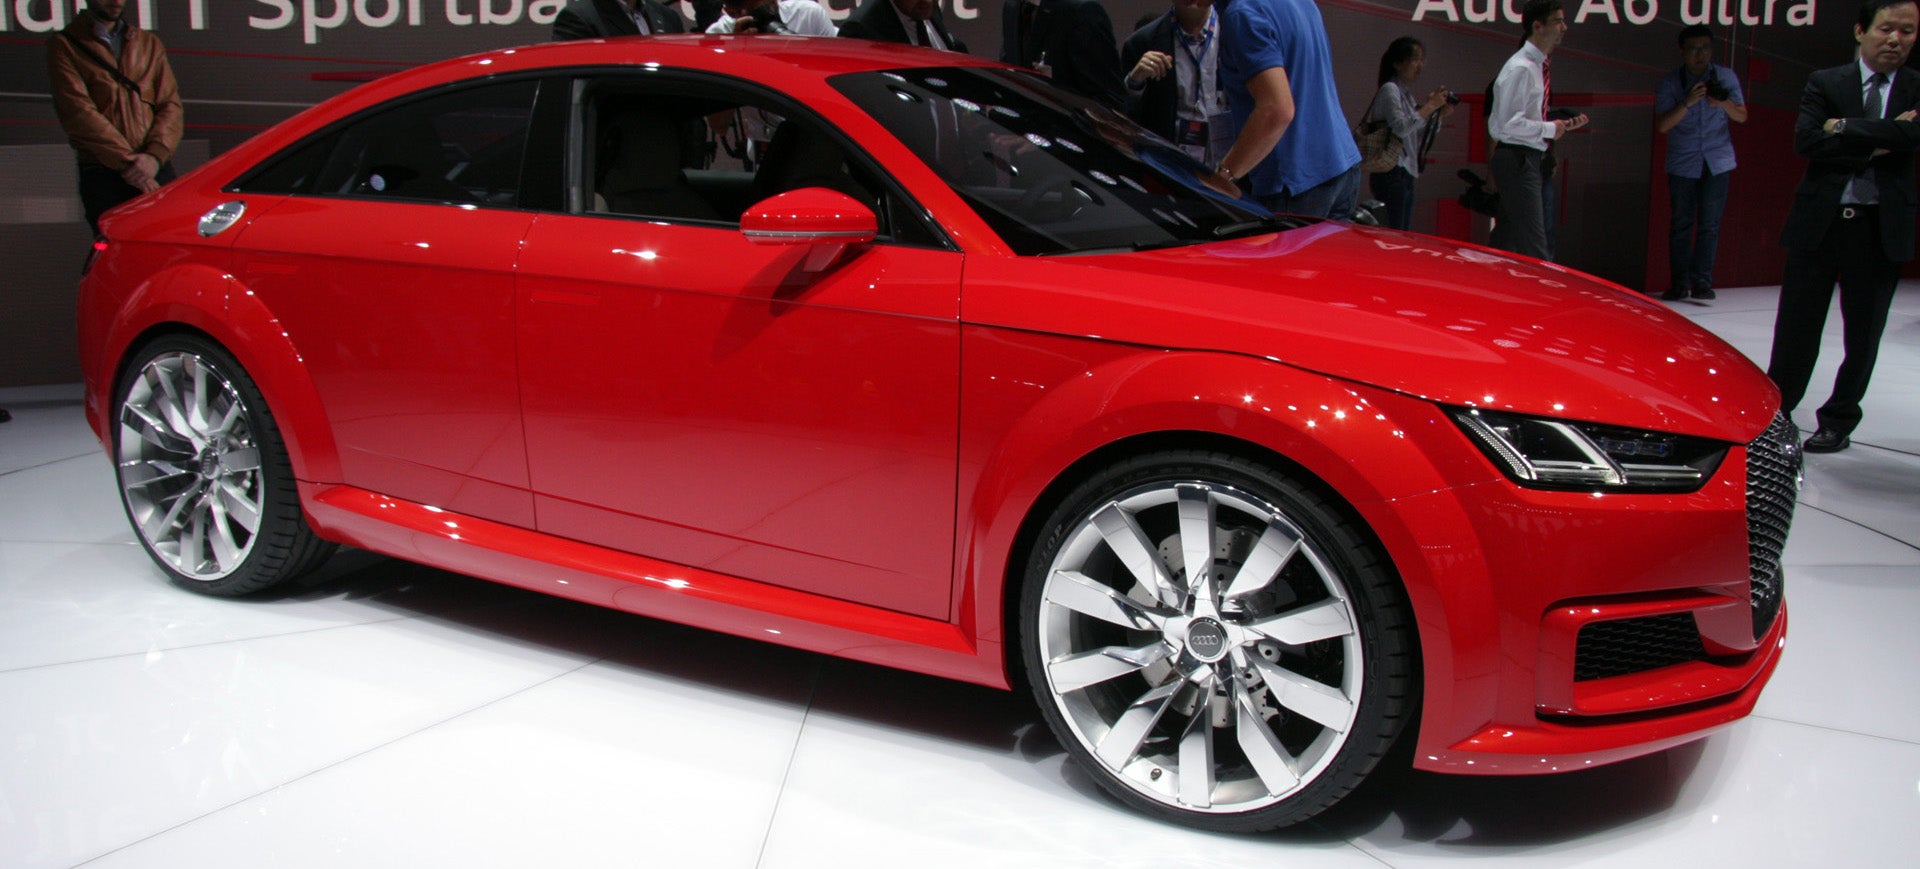 Here's How Much Space You Get In The Beetleized Audi TT Sportback